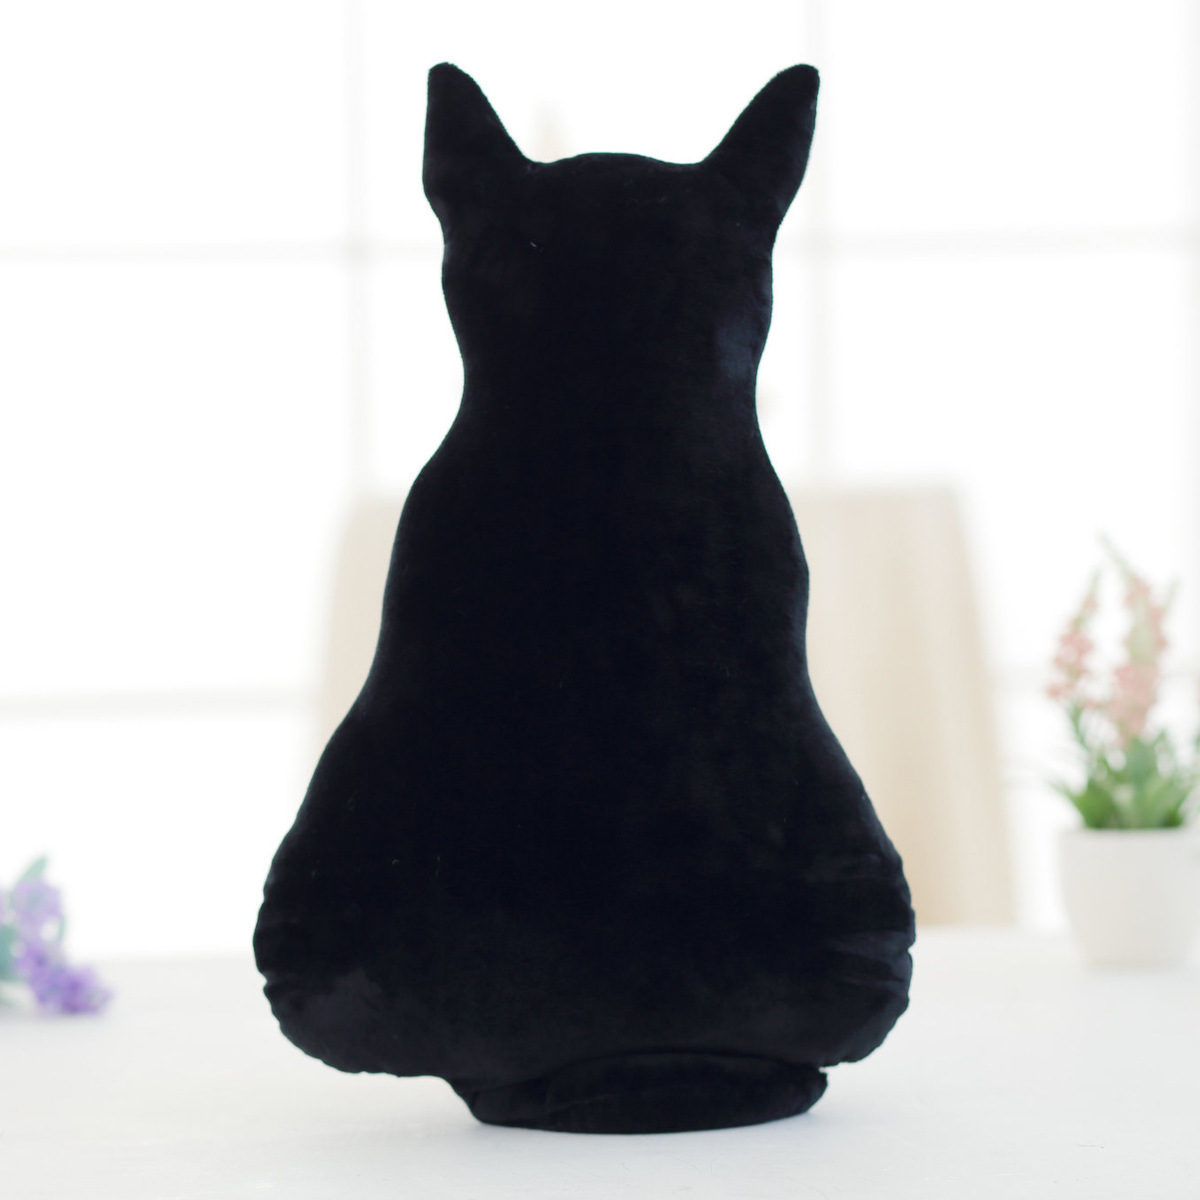 Cat Plushies Big Cozy Creative Cat Pillow: Plush Cat Doll Toy for Cuddles